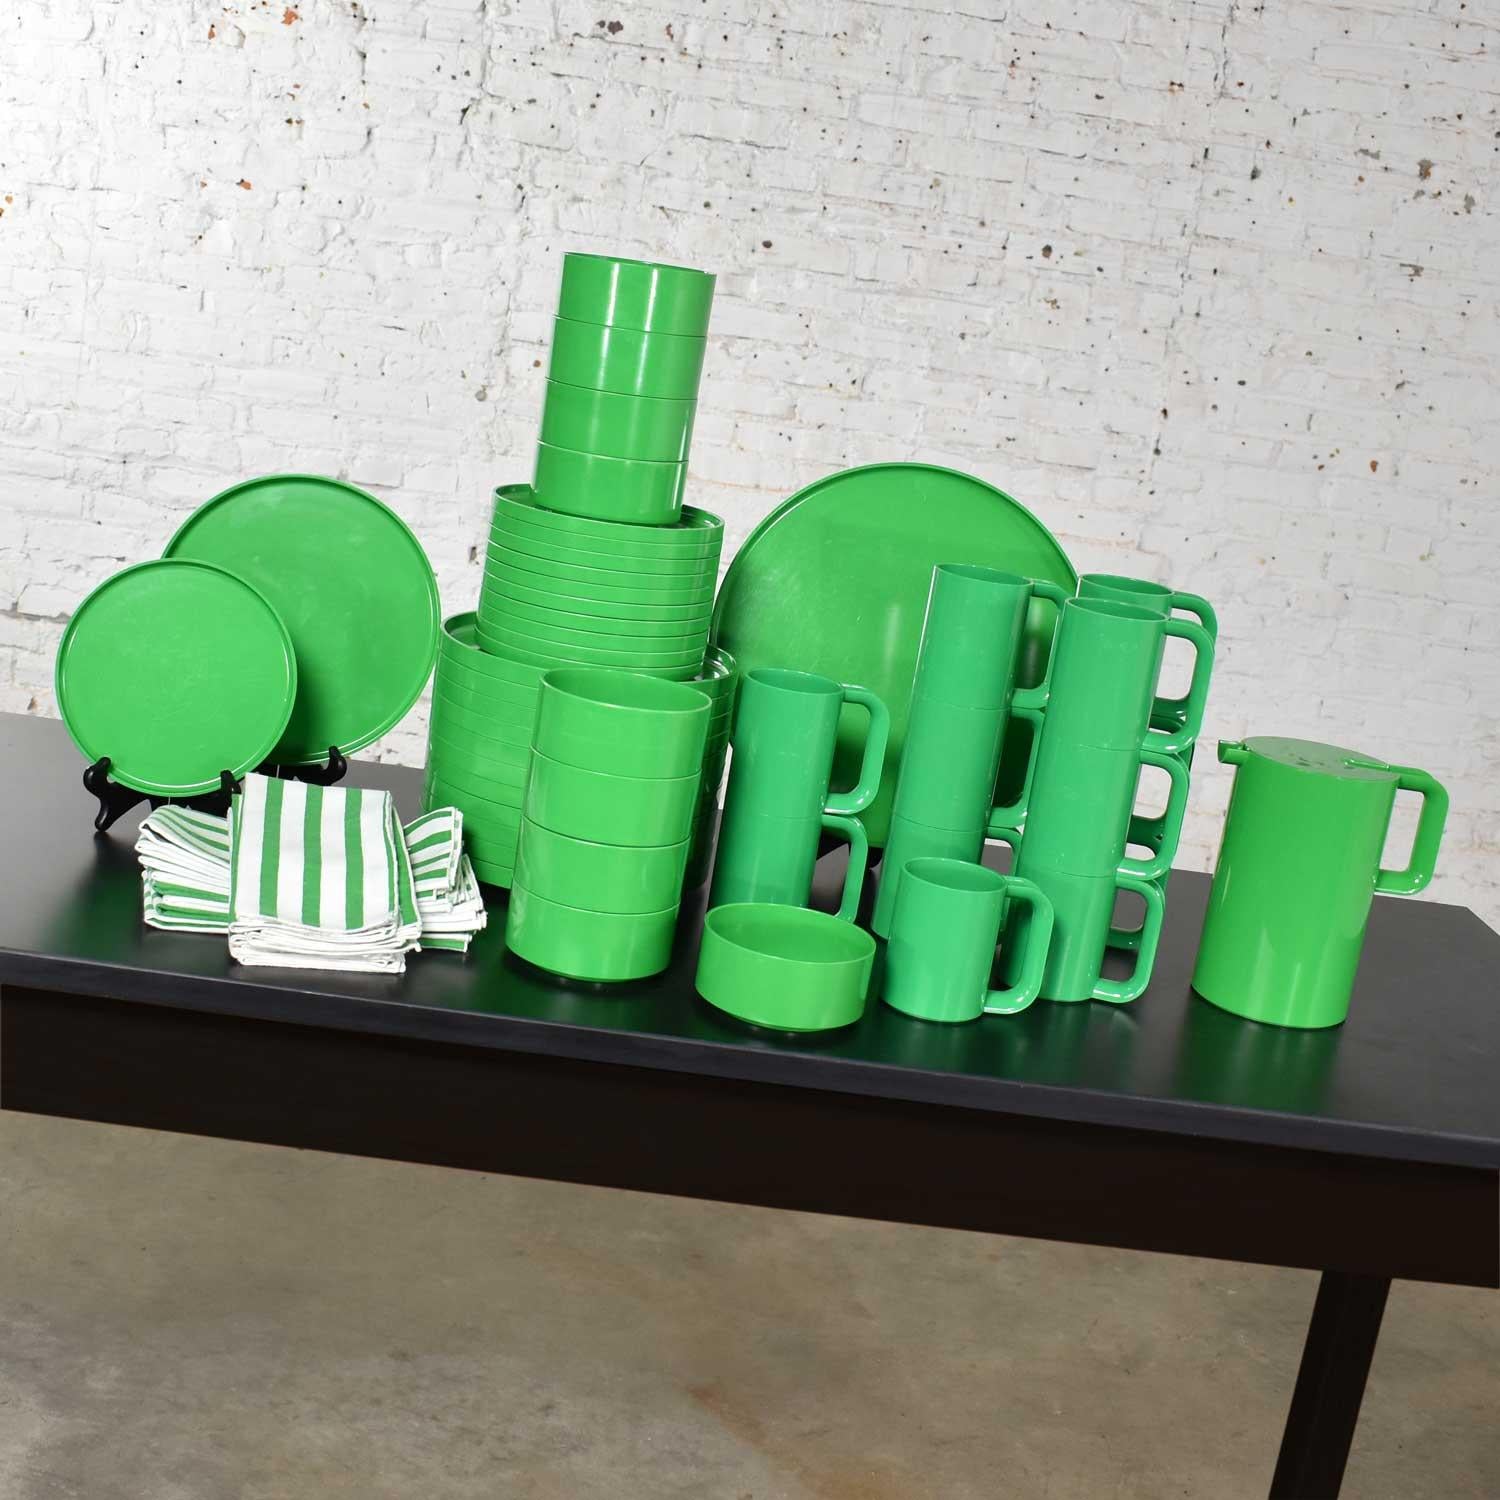 Large beautiful 58-piece set of Melamine dinnerware designed by Massimo and Lella Vignelli for Heller in Kelly green. Plus, matching green and white striped Marimekko by Fallani and Cohn napkins. This set includes 12 dinner plates, 11 salad plates,